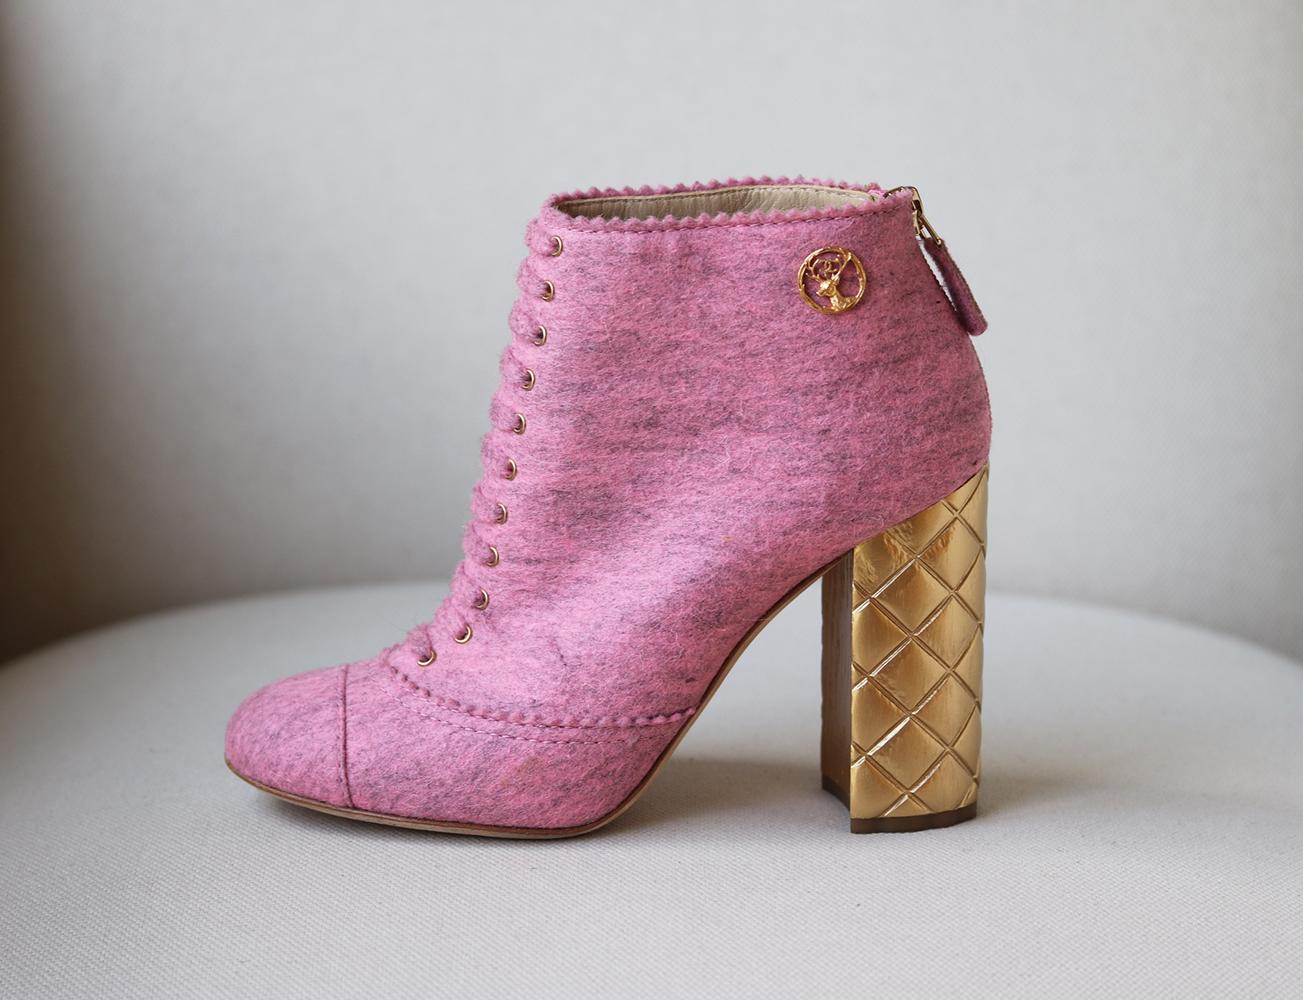 Made in Italy from textured pink felt, these boots are intricately designed with quilted block-heel and mock laces, this sculptural pair is your ticket to some daytime glam. 
Pink felt.
Heel measures approximately 100 mm/ 4 inches.
Gold quilted